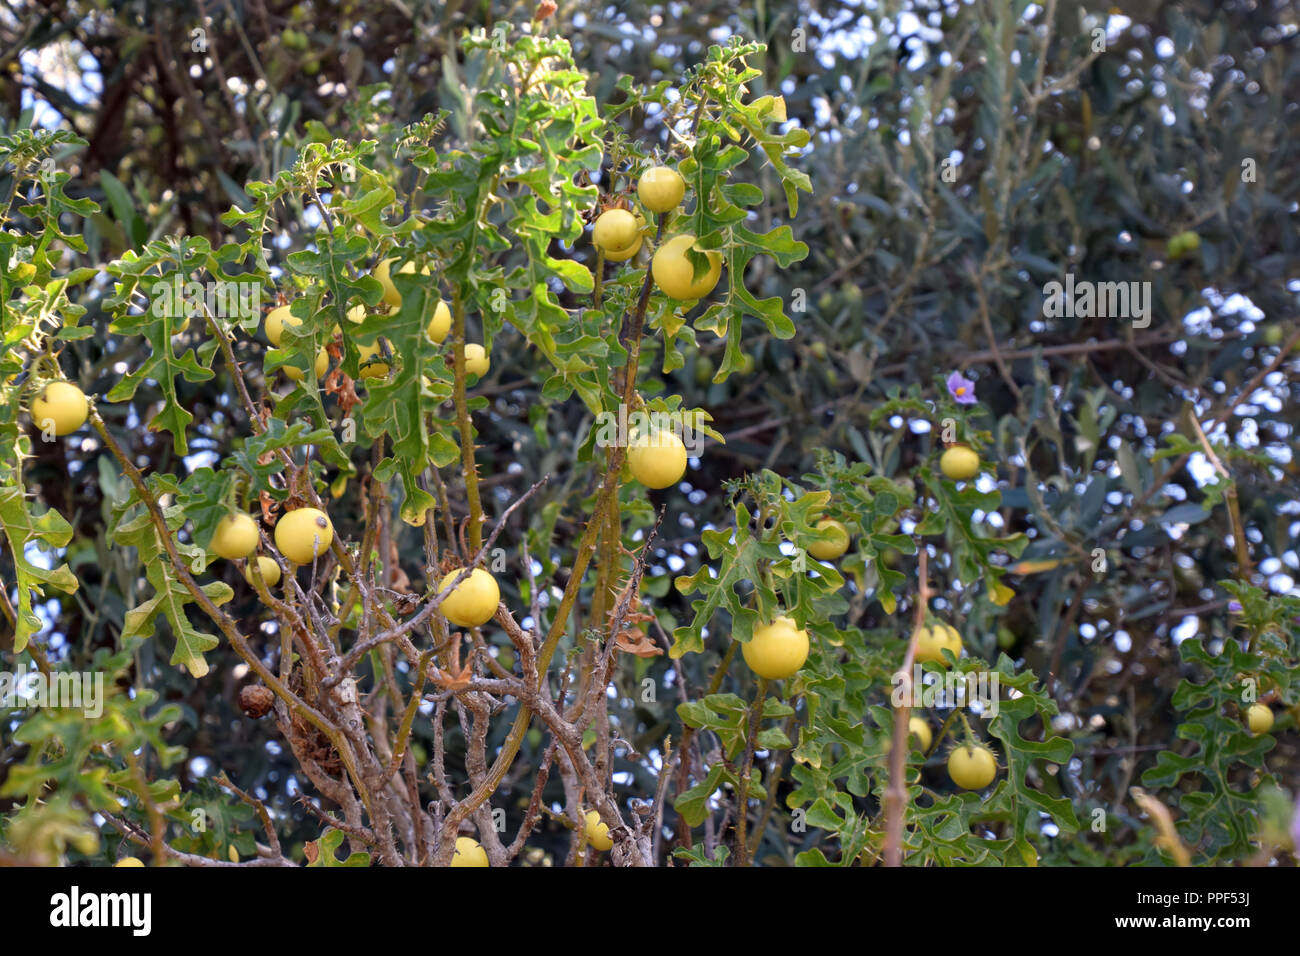 solanum linnaeanum shrub with ripe yellow fruits in late summer in sardinia, highly toxic tomato-like plant with big yellow thorns and purple flowers Stock Photo